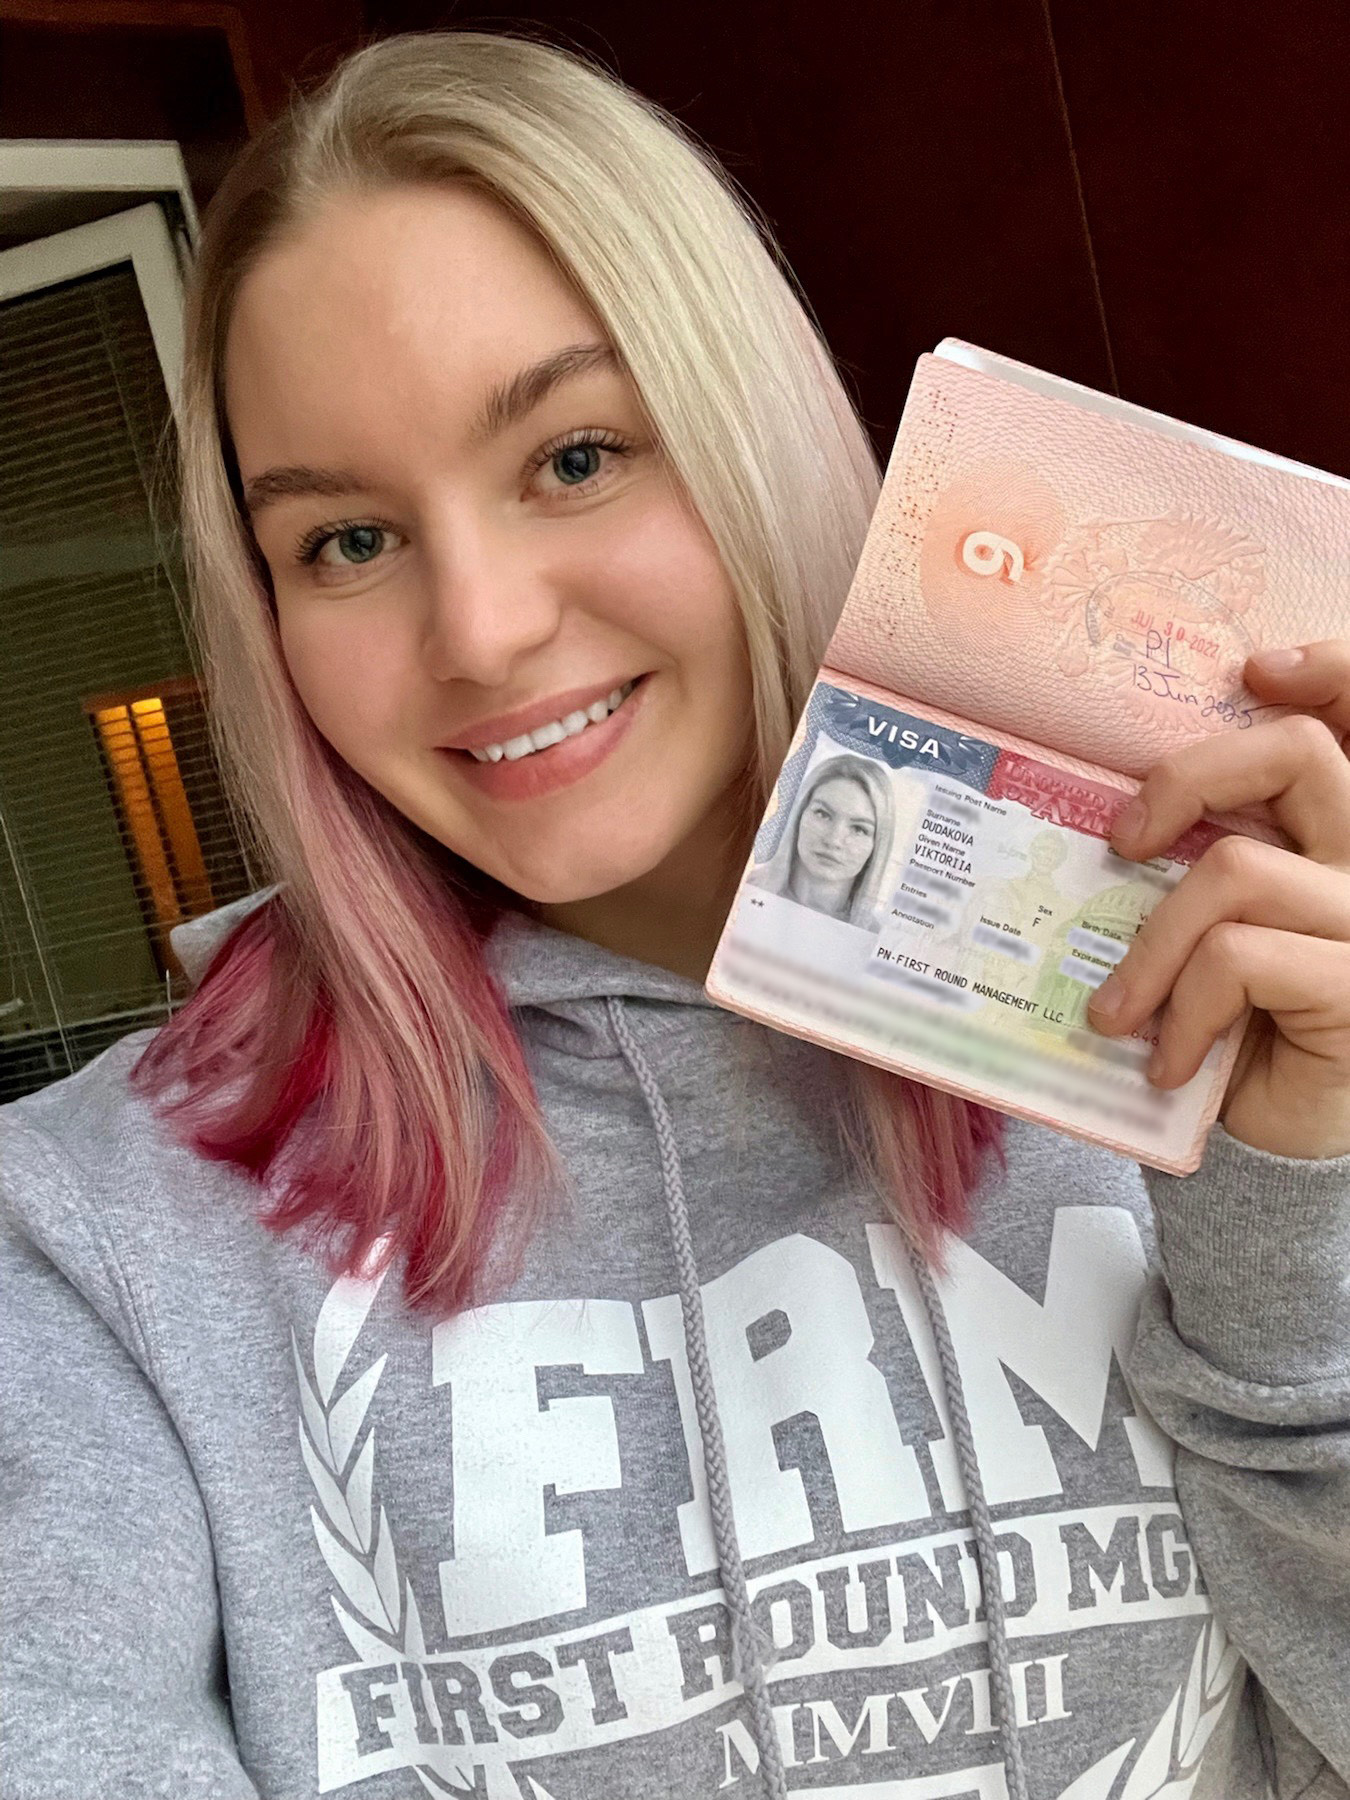 Dudakova holds her passport allowing her entry to the U.S